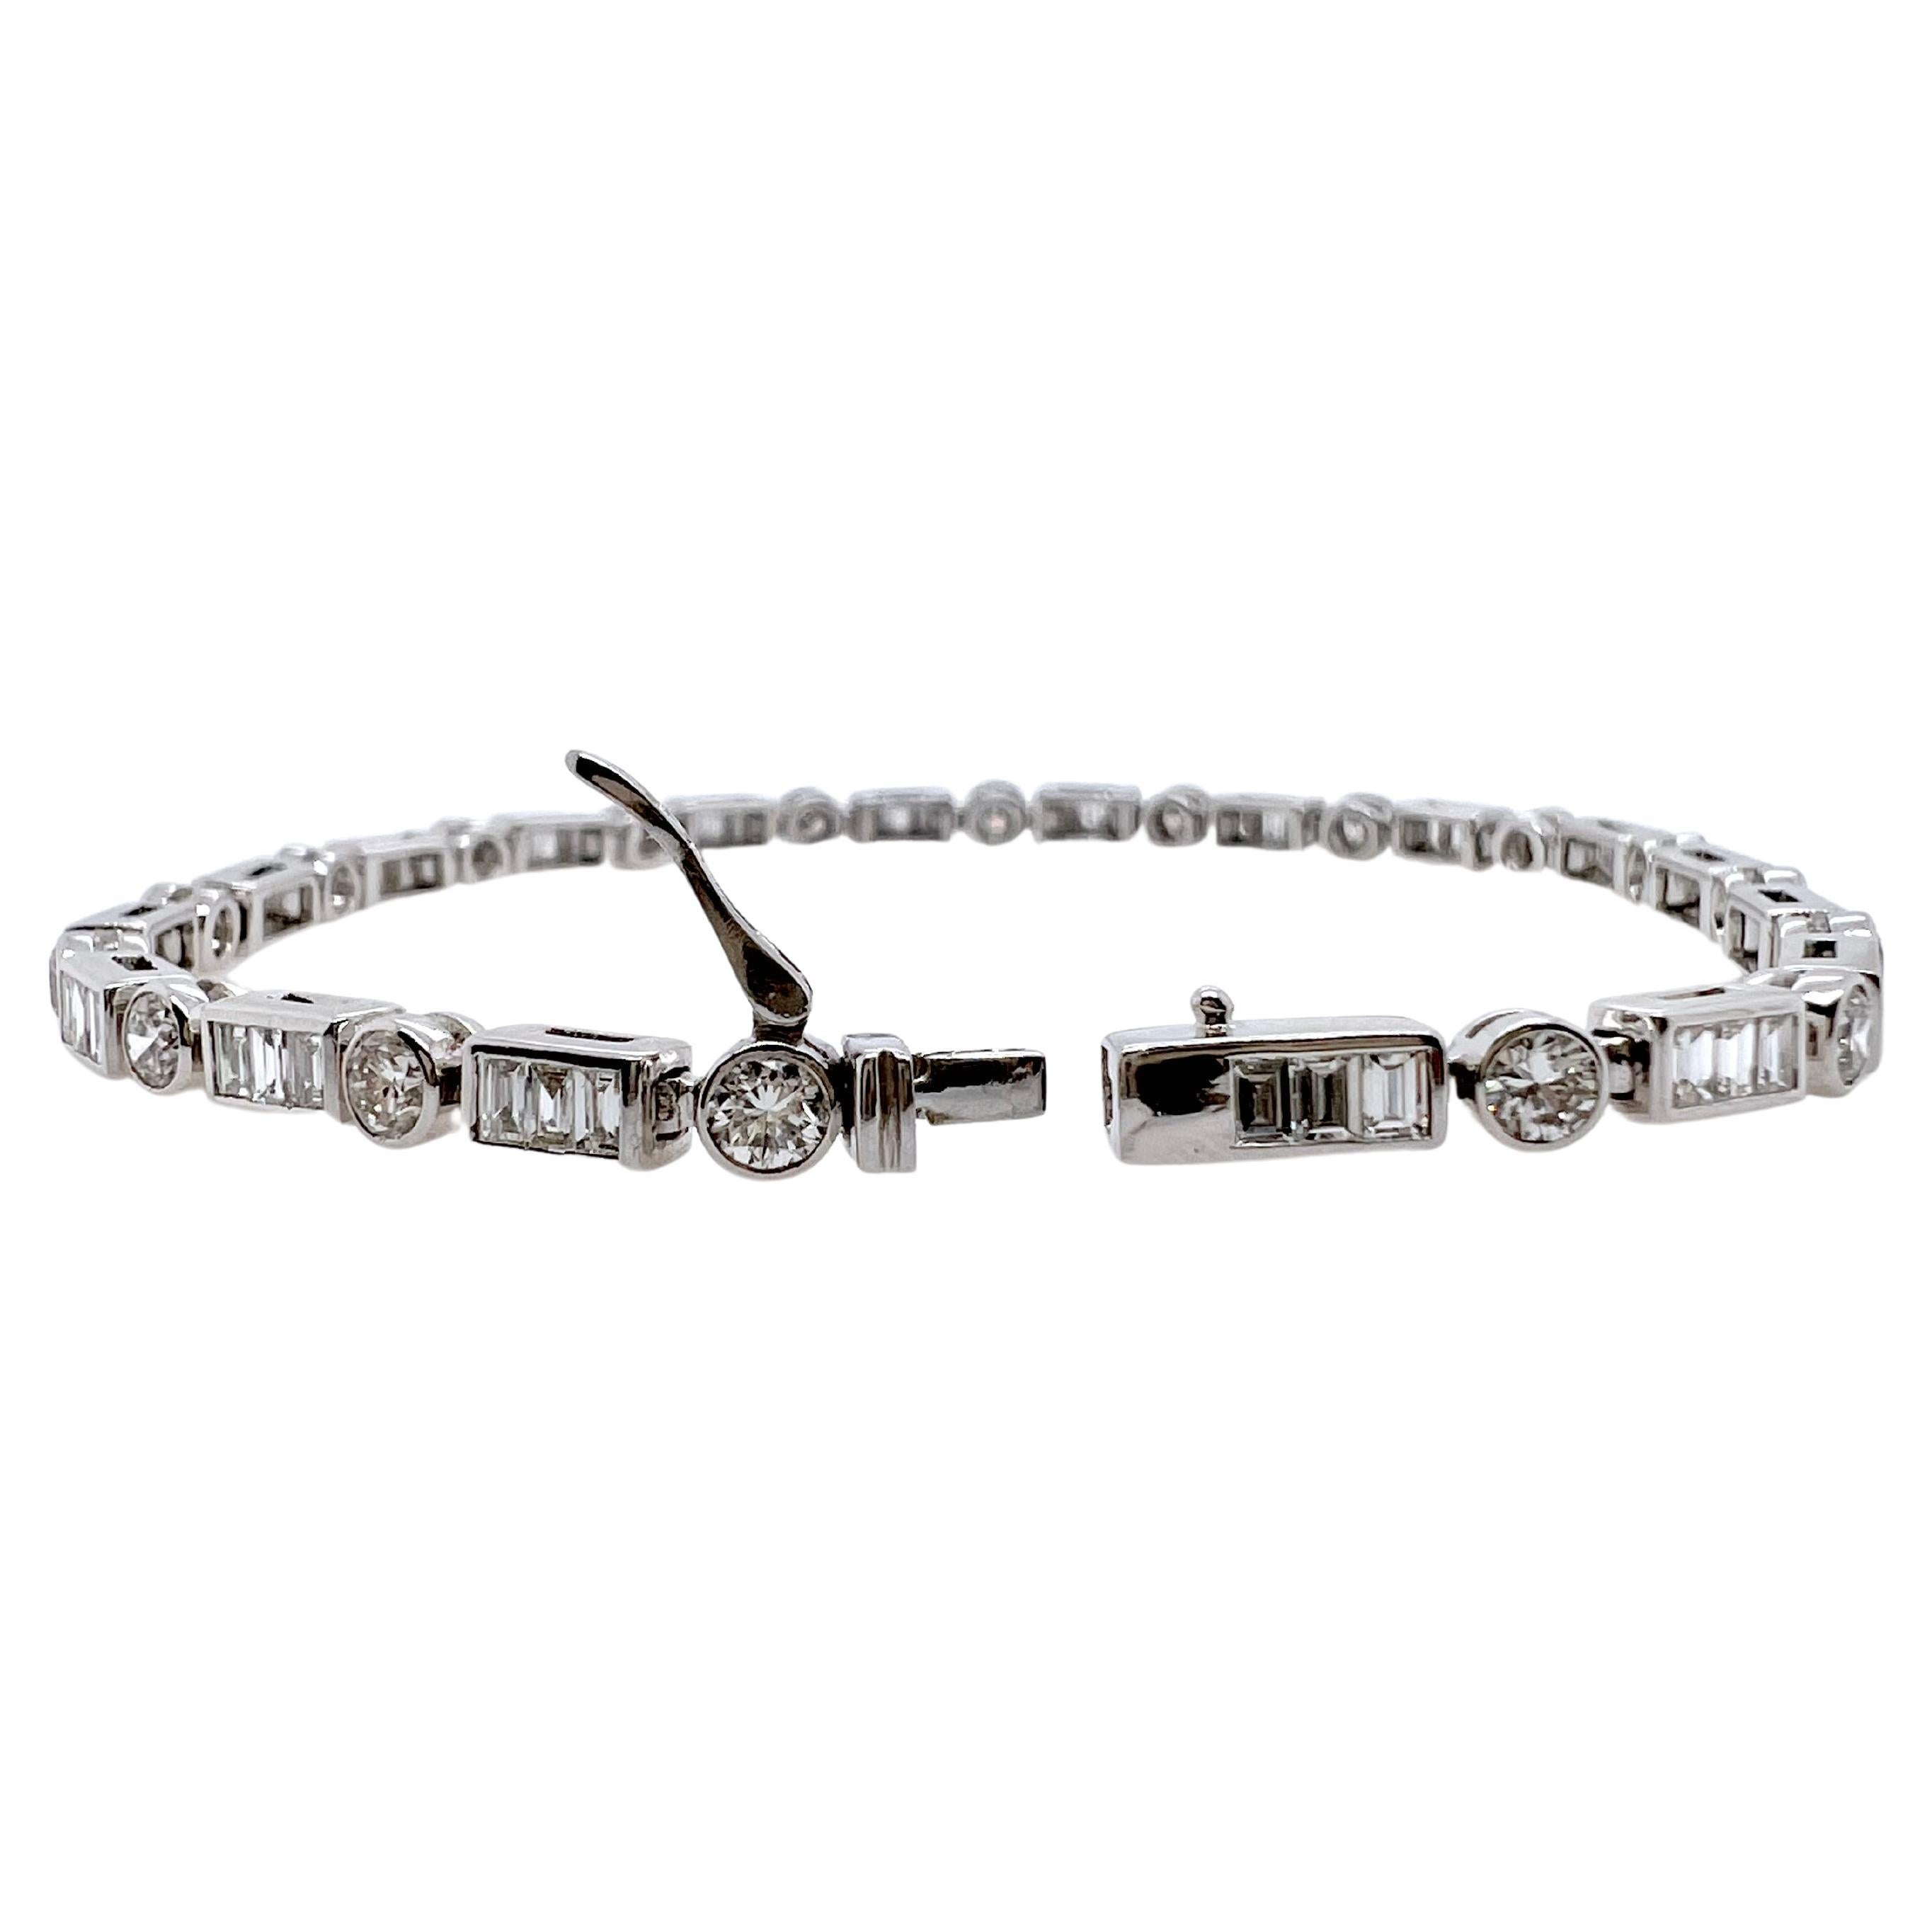 This modern diamond tennis bracelet is so versatile that can be worn smart casual or daily.  It is in 18k white gold and has round brilliant diamonds bezel set along with baguette diamonds channel set.  The pattern makes it different than the